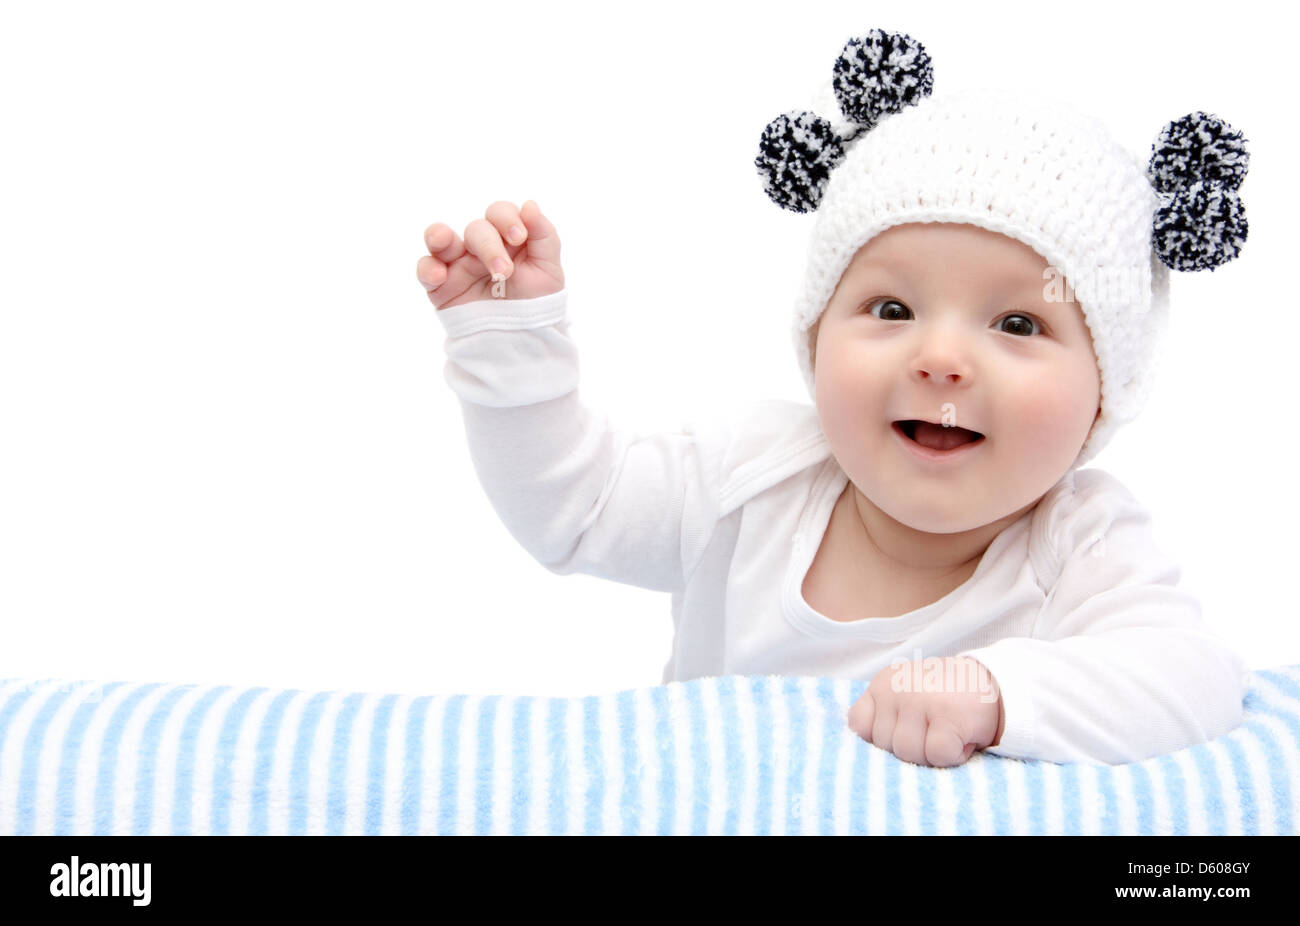 Baby laughing Stock Photo